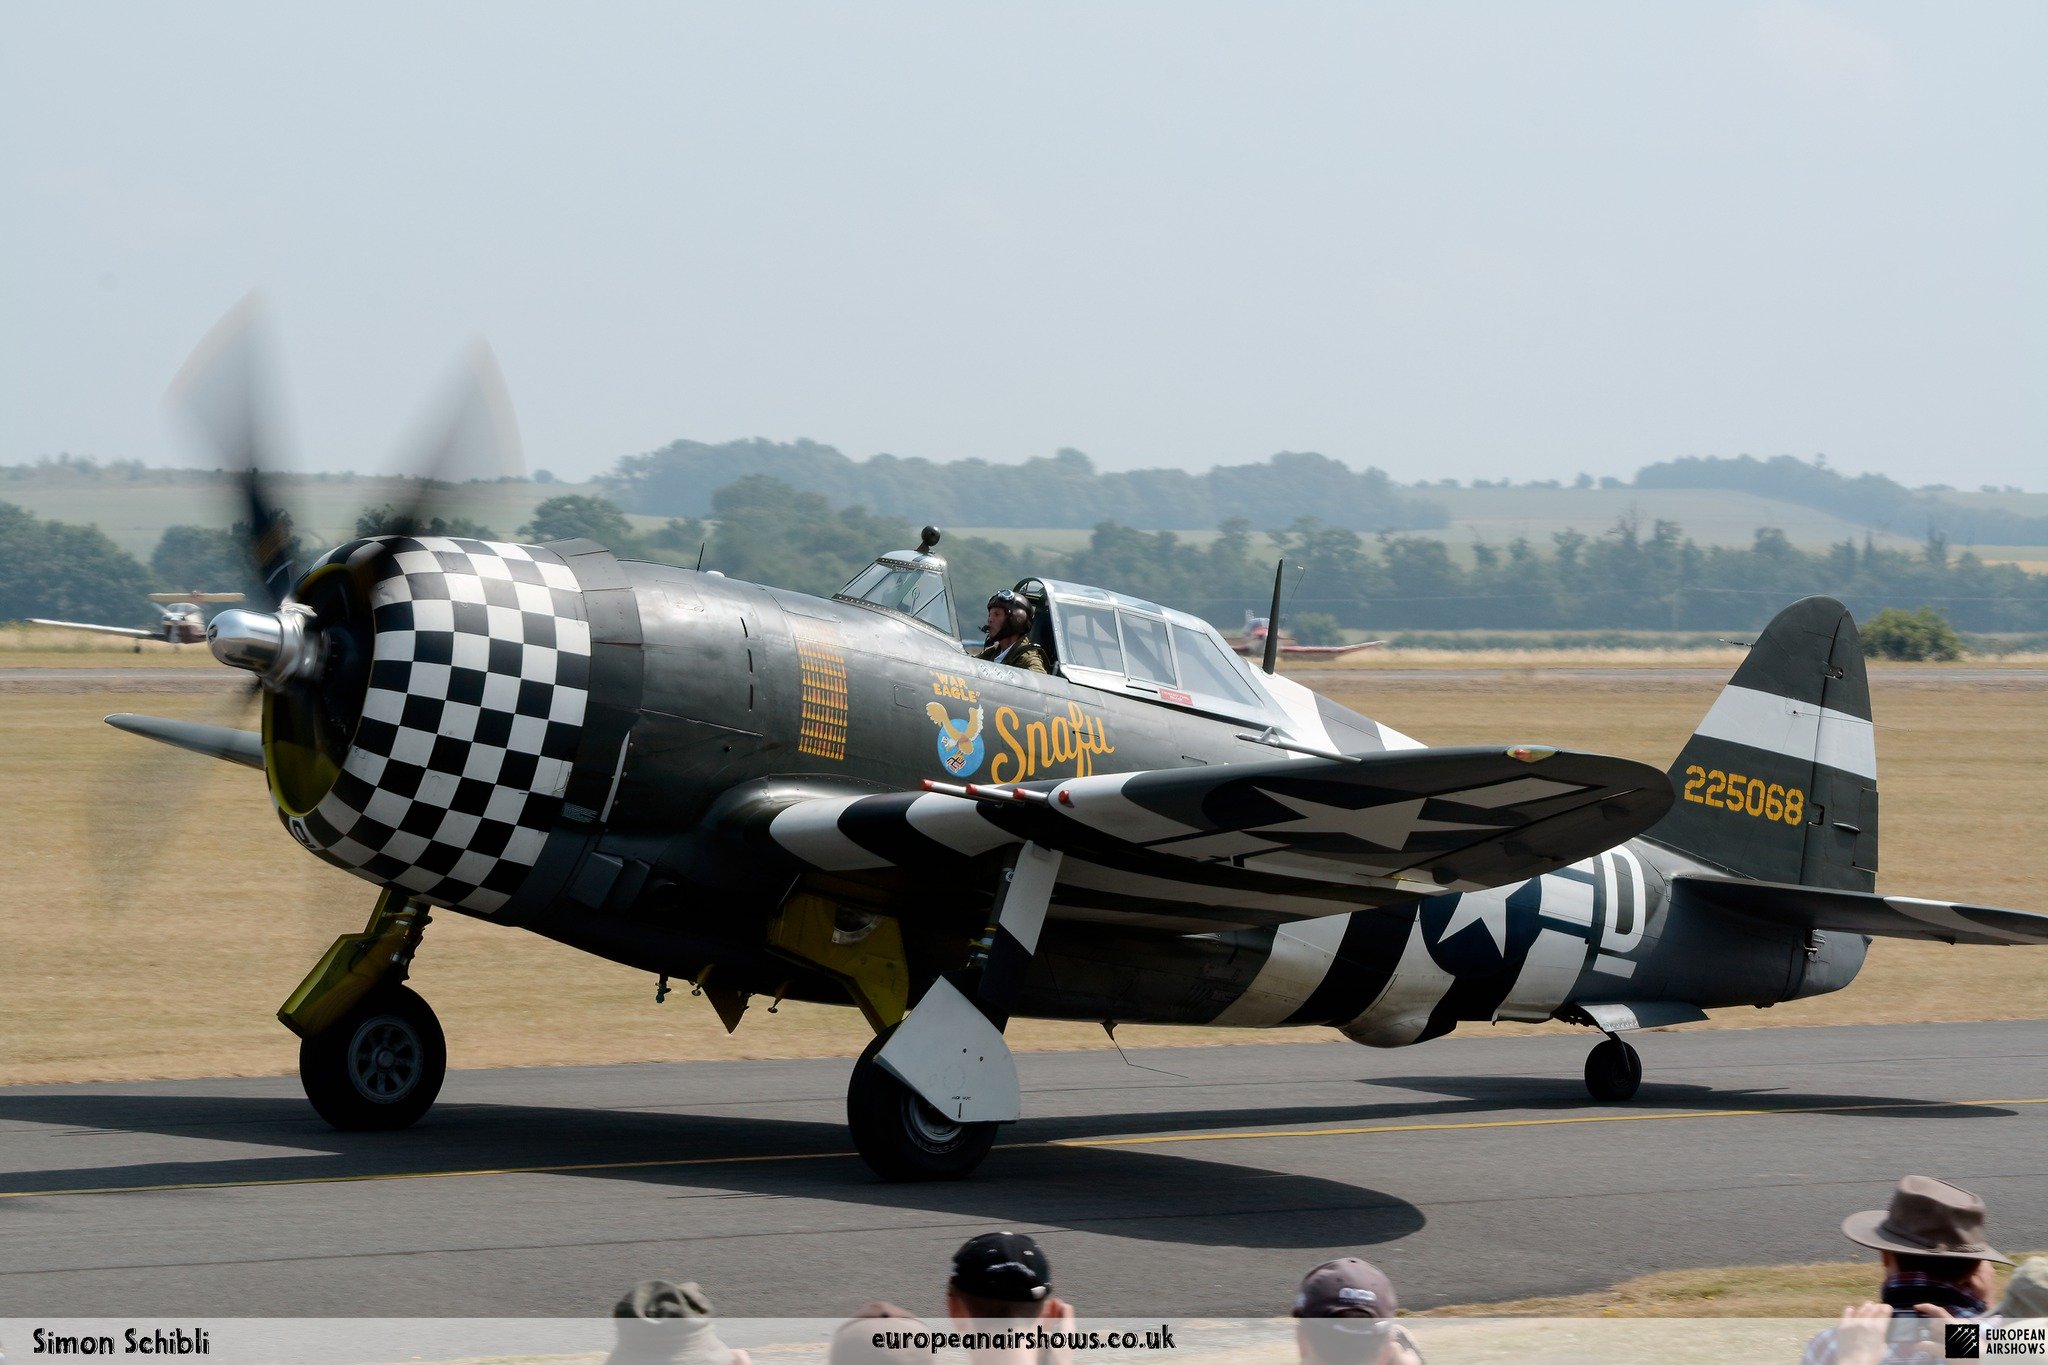 #Onthisday📅 6 May 1941, Republic P-47 Thunderbolt performed its first flight. 

During World War Two, the Republic P-47 Thunderbolt stood out as the heaviest single-engine fighter to see service. Its remarkable bulk made it appear massive when parke